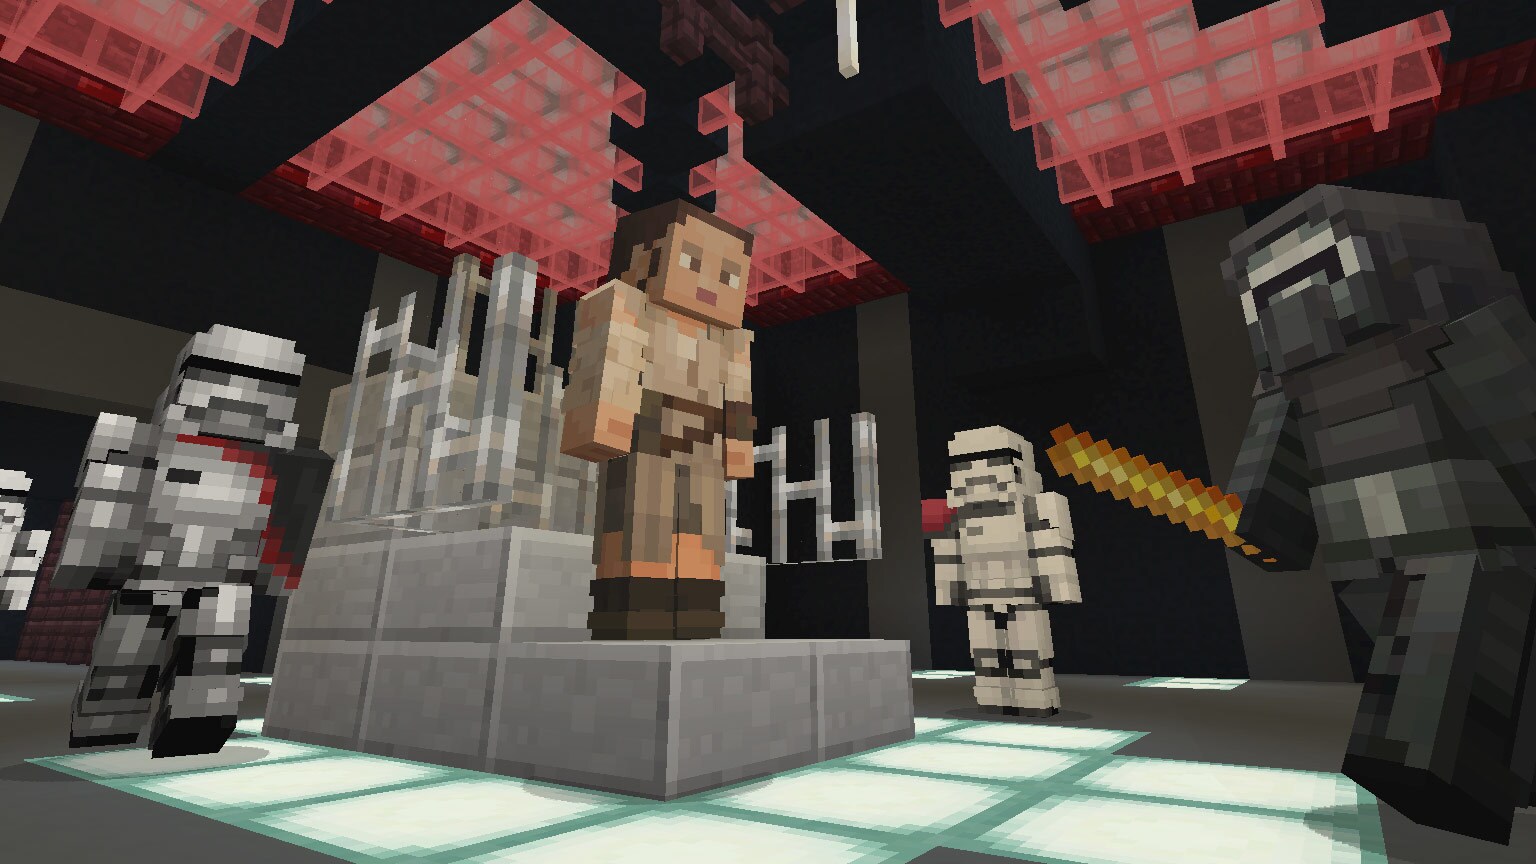 Minecraft Artists on Creating 53 New Character Designs for the Star Wars Sequel Skin Pack